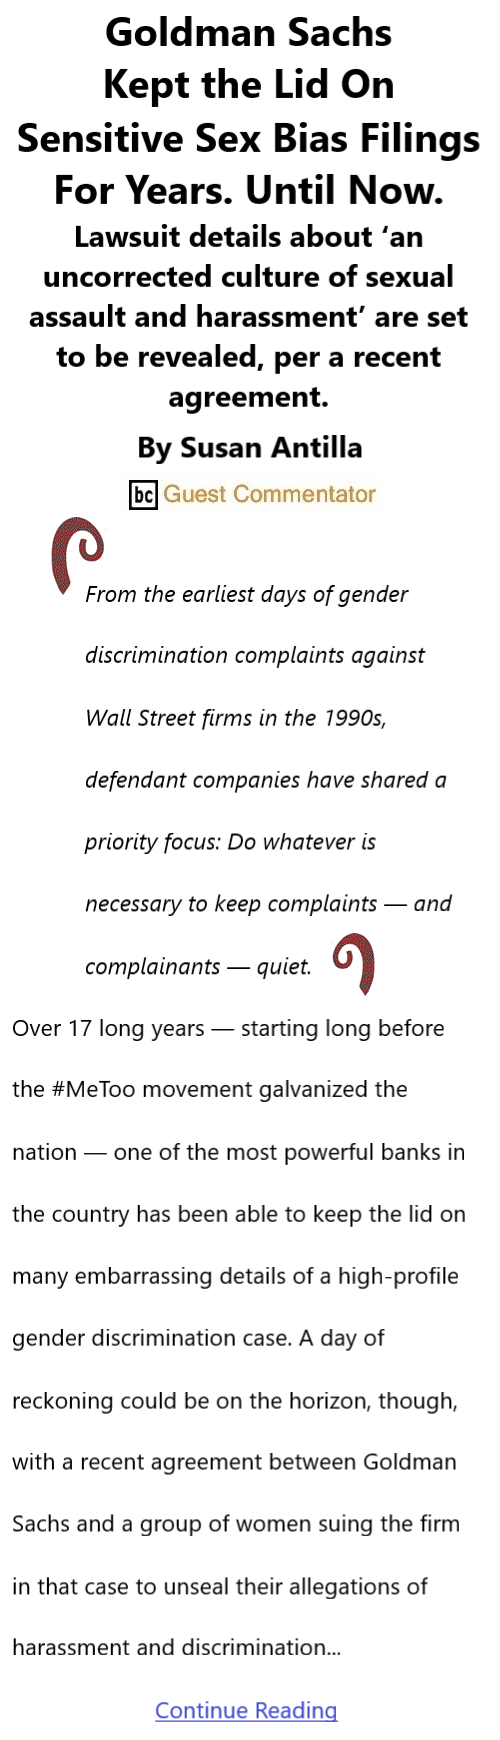 BlackCommentator.com July 28, 2022 - Issue 921: Goldman Sachs Kept the Lid On Sensitive Sex Bias Filings For Years. Until Now. By Susan Antilla, BC Guest Commentator